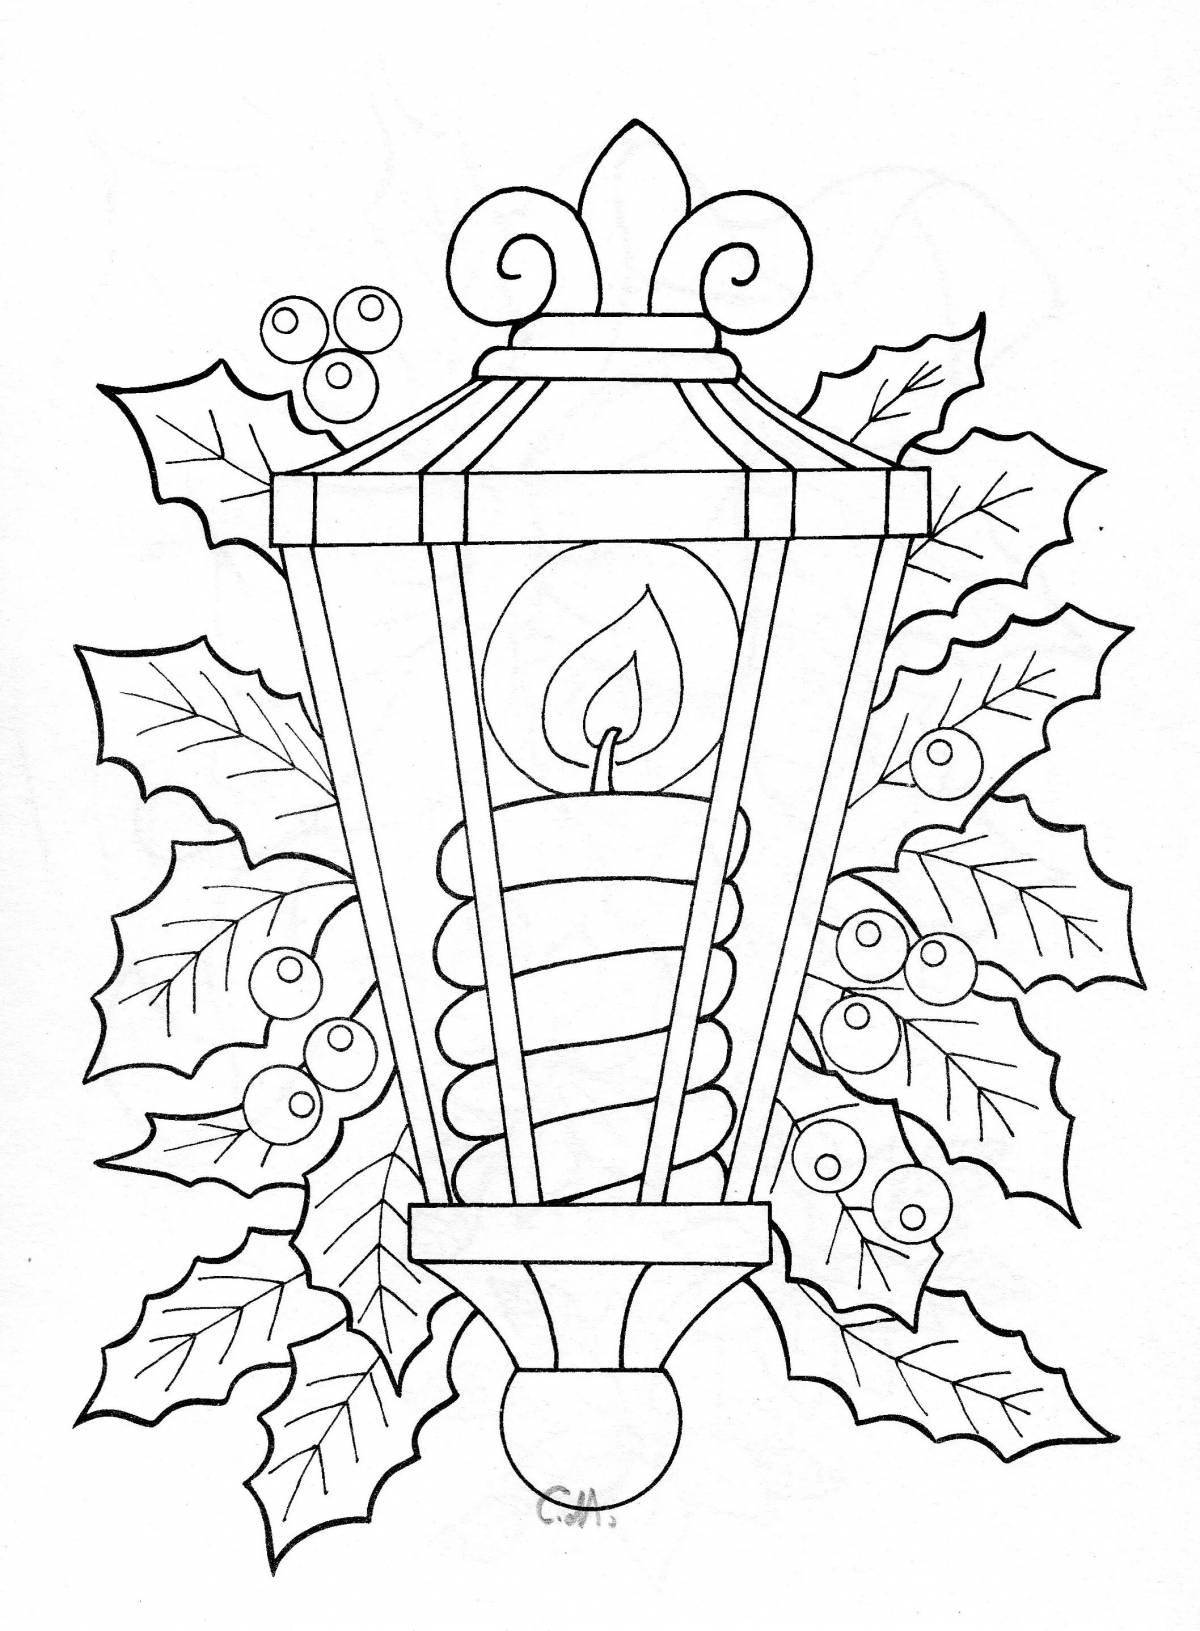 Shiny lantern coloring book for kids